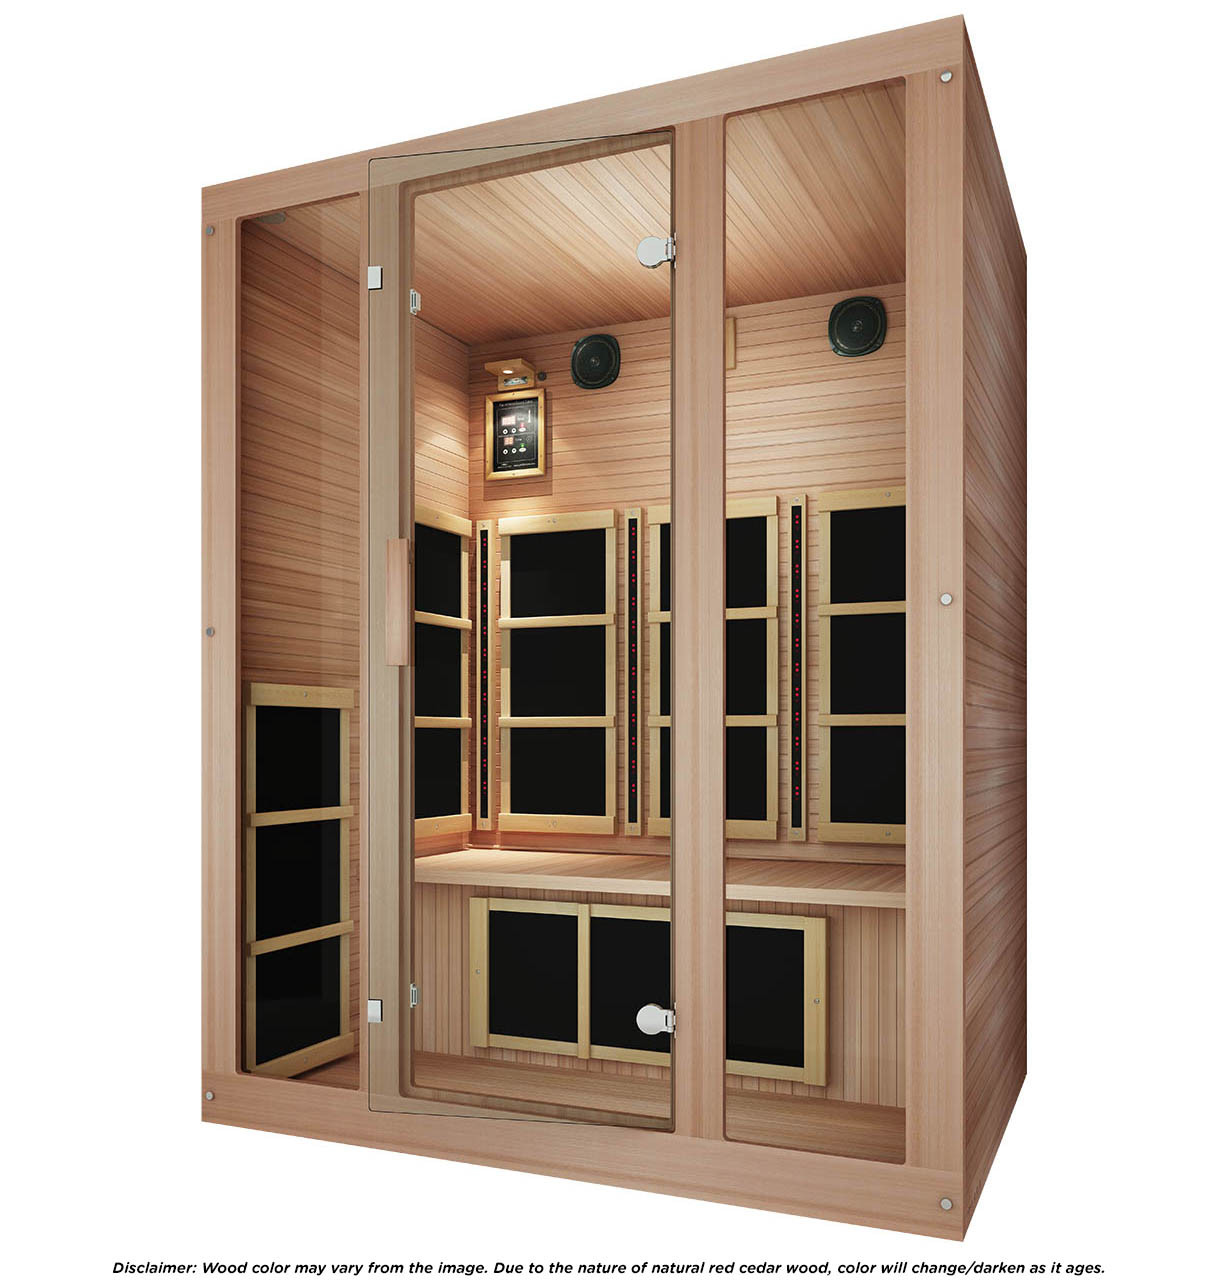 JNH Lifestyles Tosi Red™ 3 Person Full Spectrum Infrared Sauna